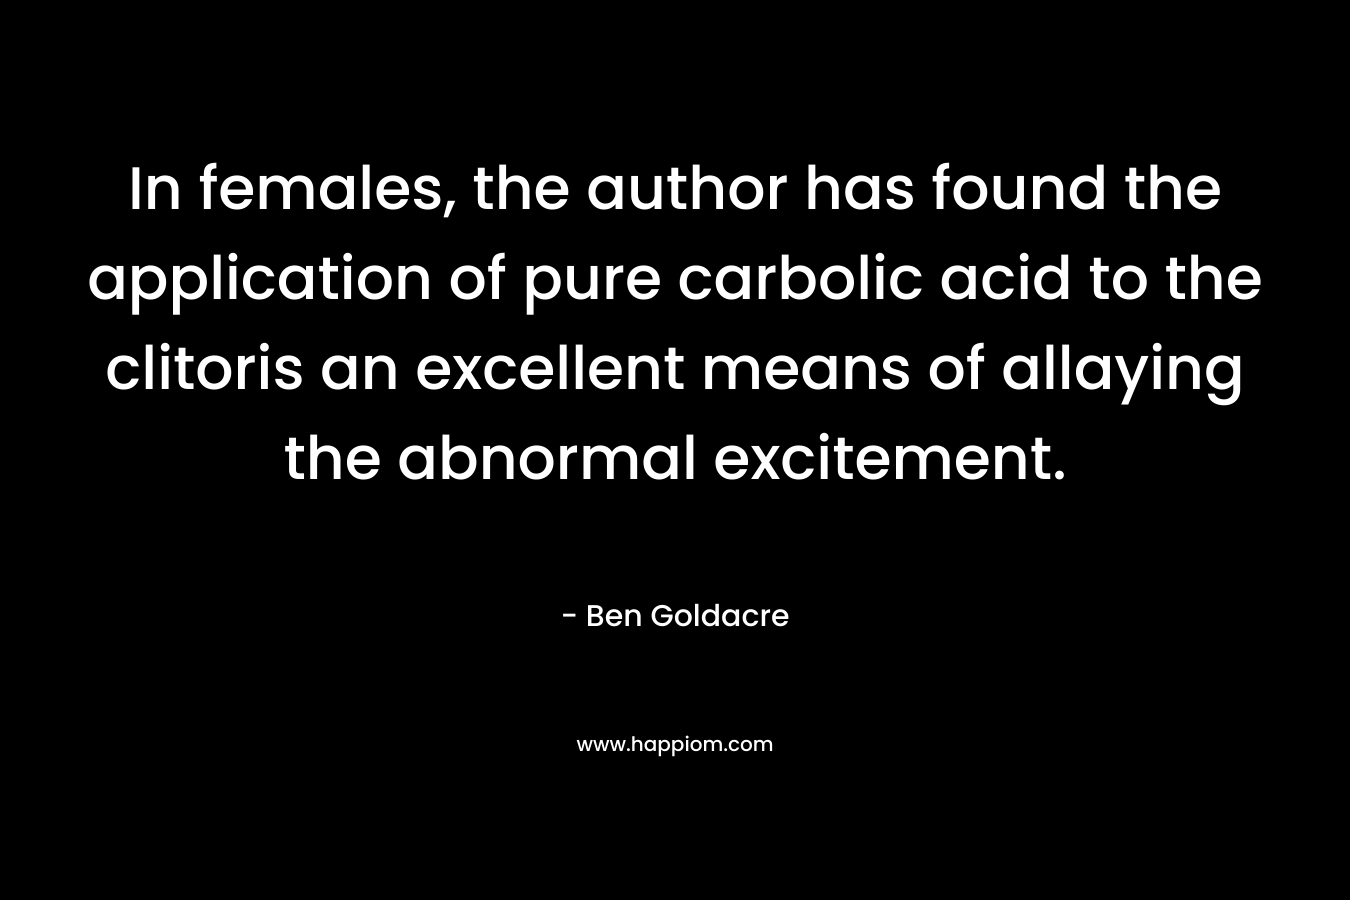 In females, the author has found the application of pure carbolic acid to the clitoris an excellent means of allaying the abnormal excitement. – Ben Goldacre